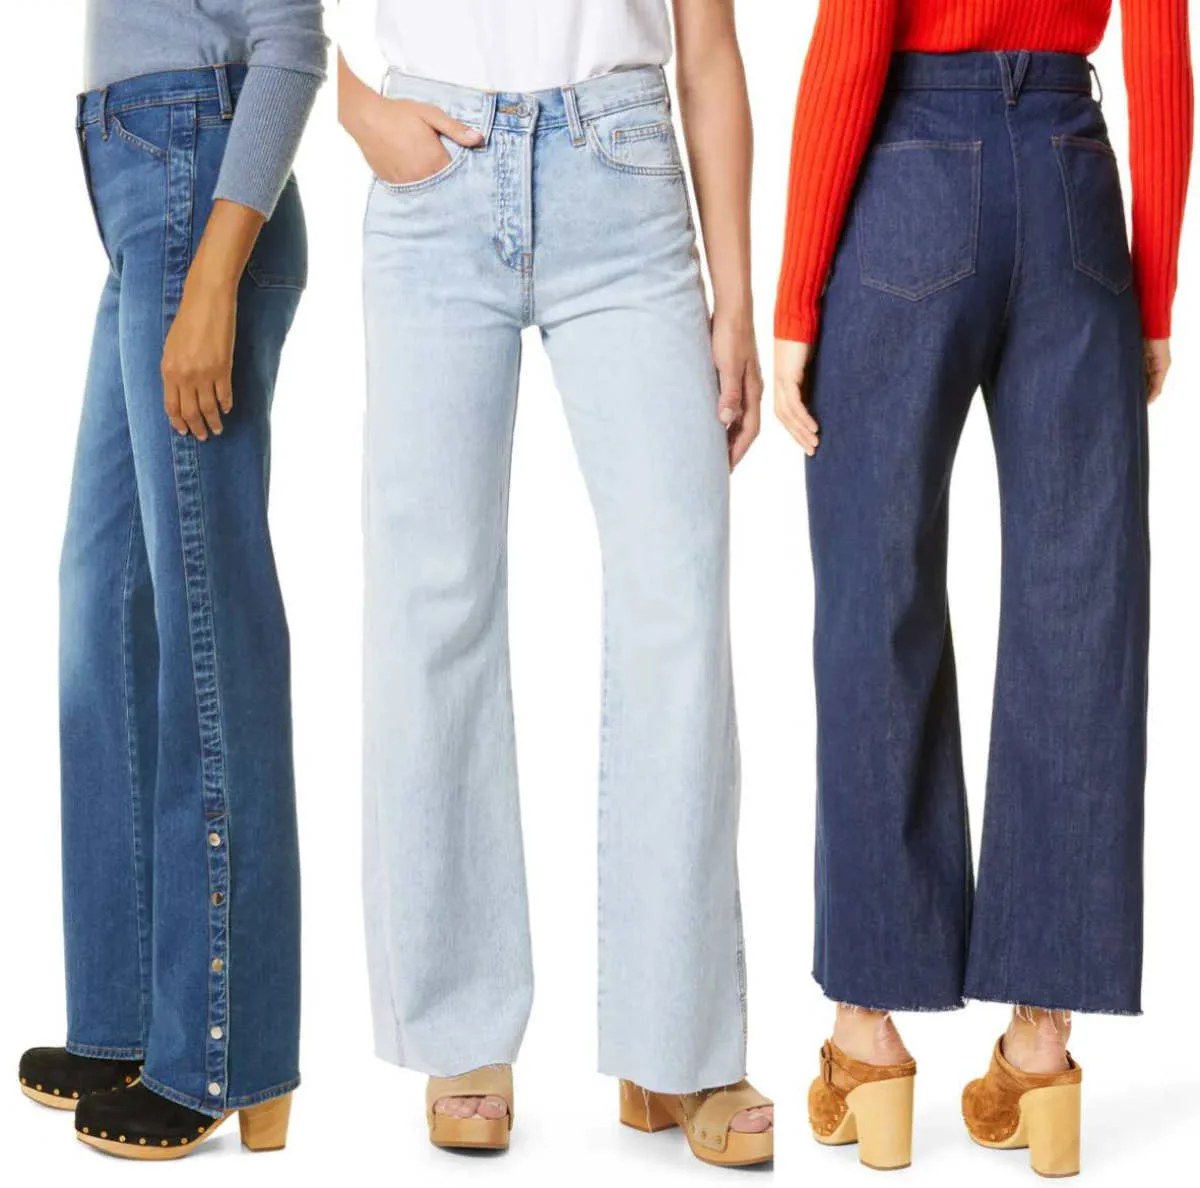 3 women wearing different clogs shoes with wide leg jeans.